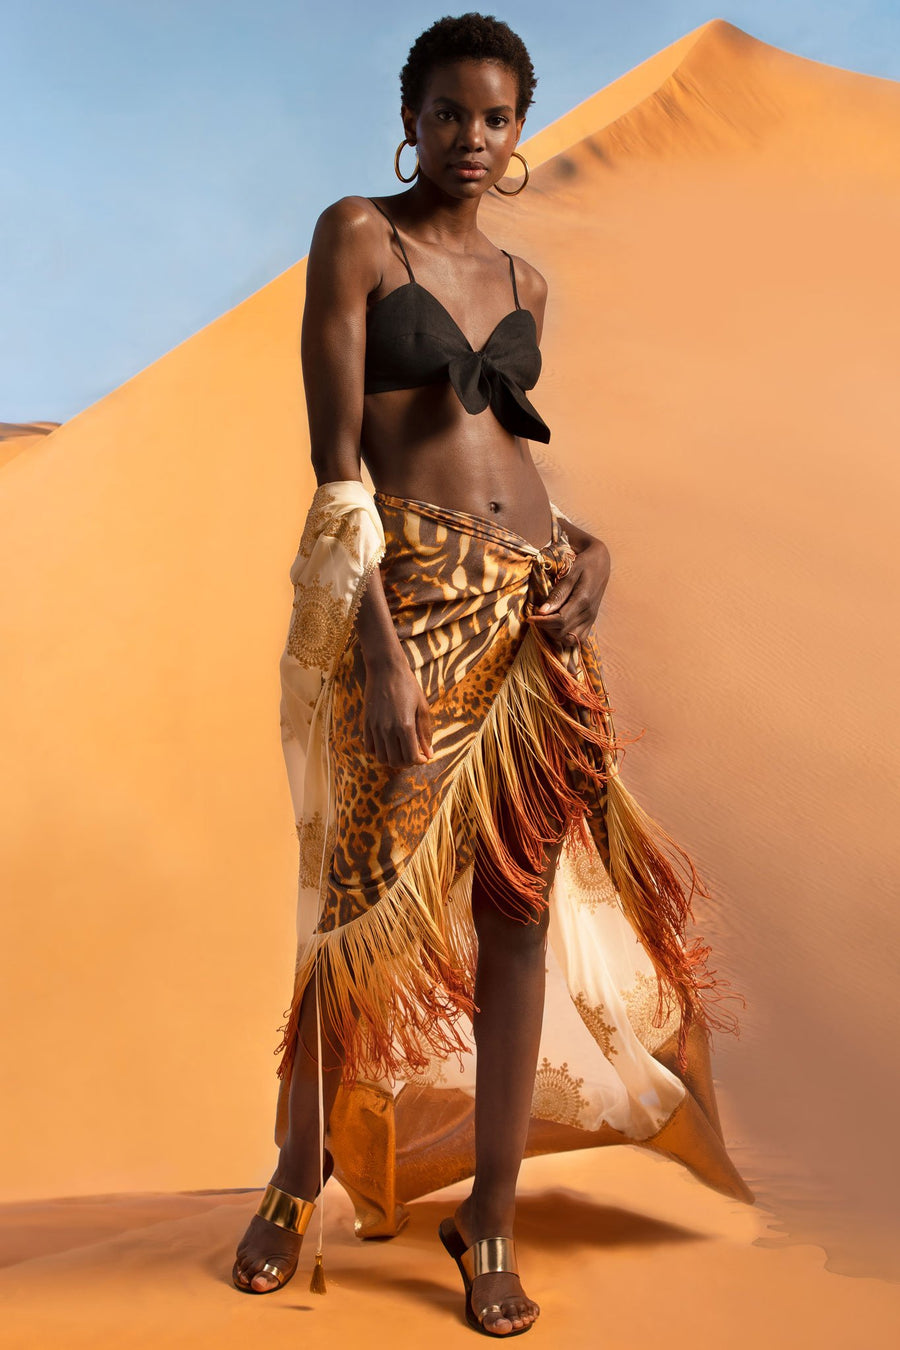 This is a photo of a woman wearing a black linen bralette with center tie, paired with a cheetah pareo with ombre fringe on the hemline. Falling around her arms, she wears a white coat with gold embellishments and a gold hemline. She stands in front of a desert sand dune.